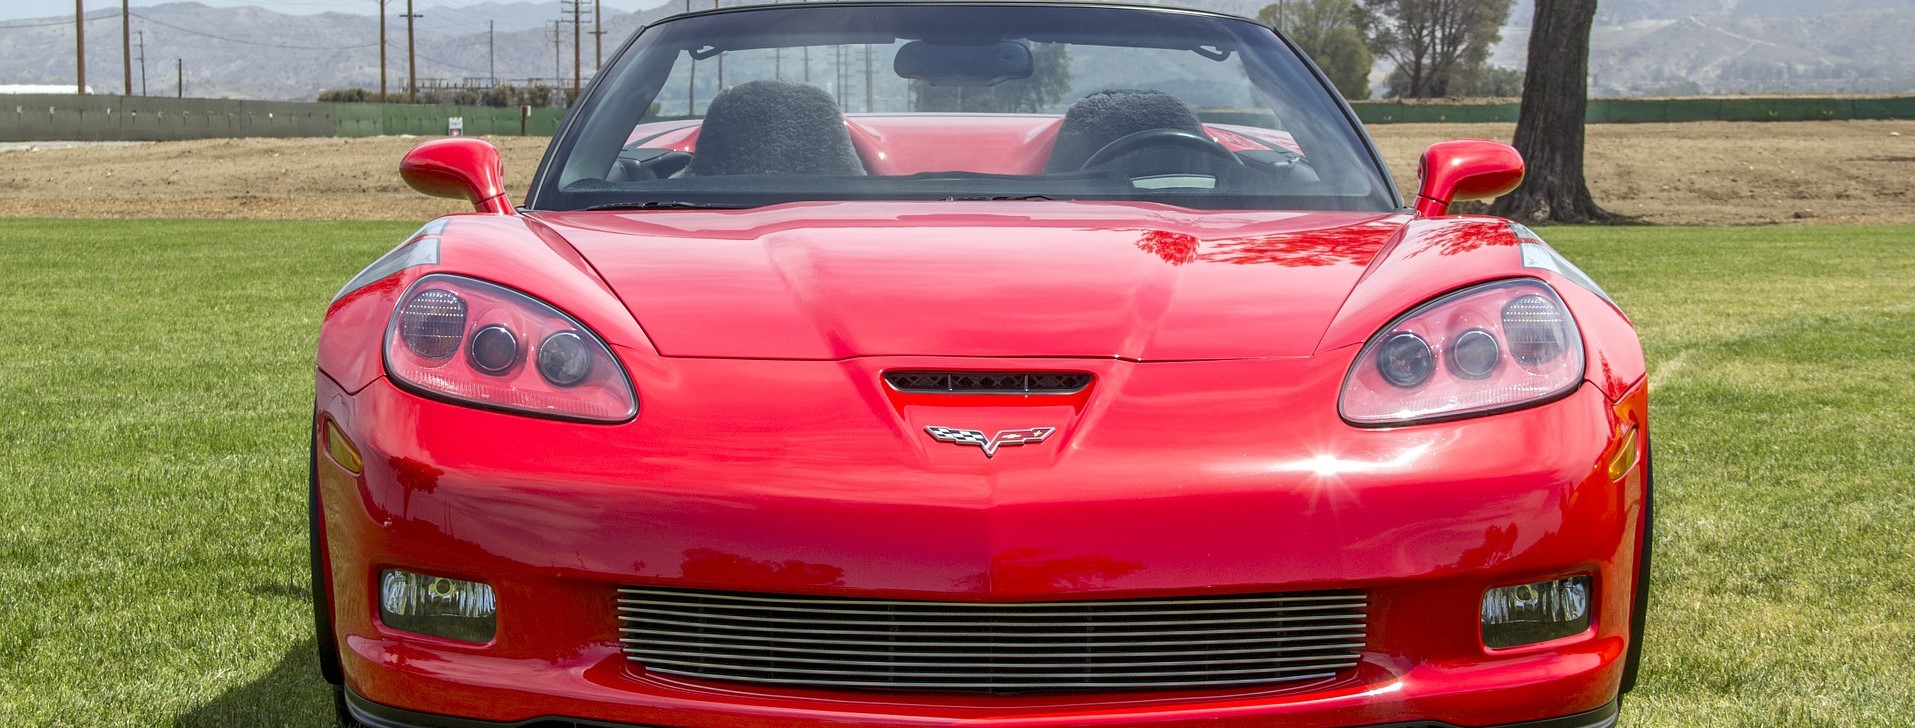 Red Corvette in Bel Air, Maryland | Breast Cancer Car Donations